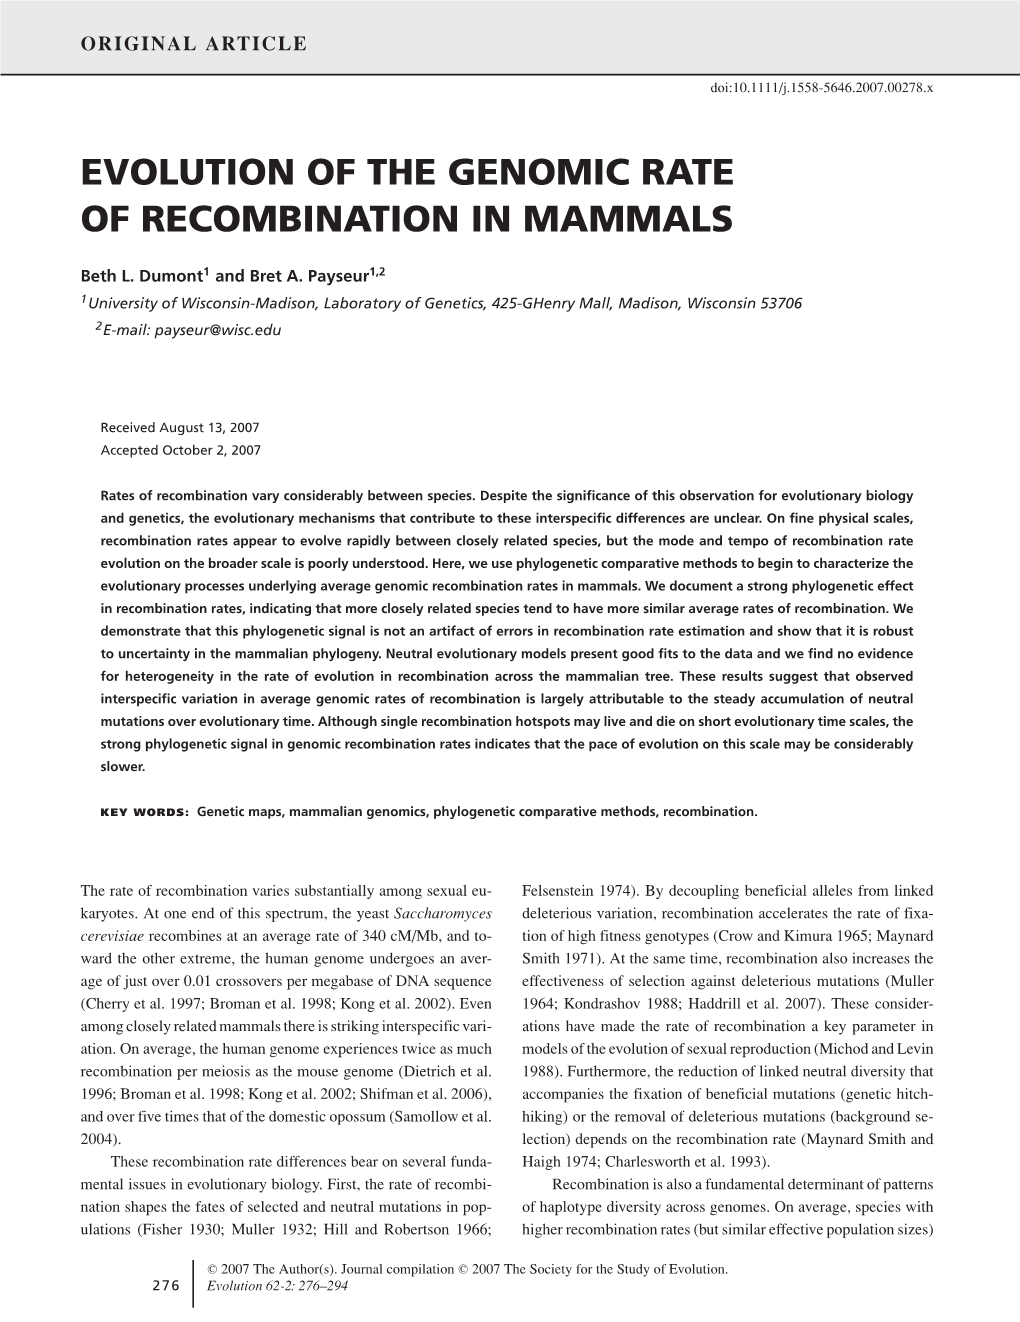 Evolution of the Genomic Rate of Recombination in Mammals